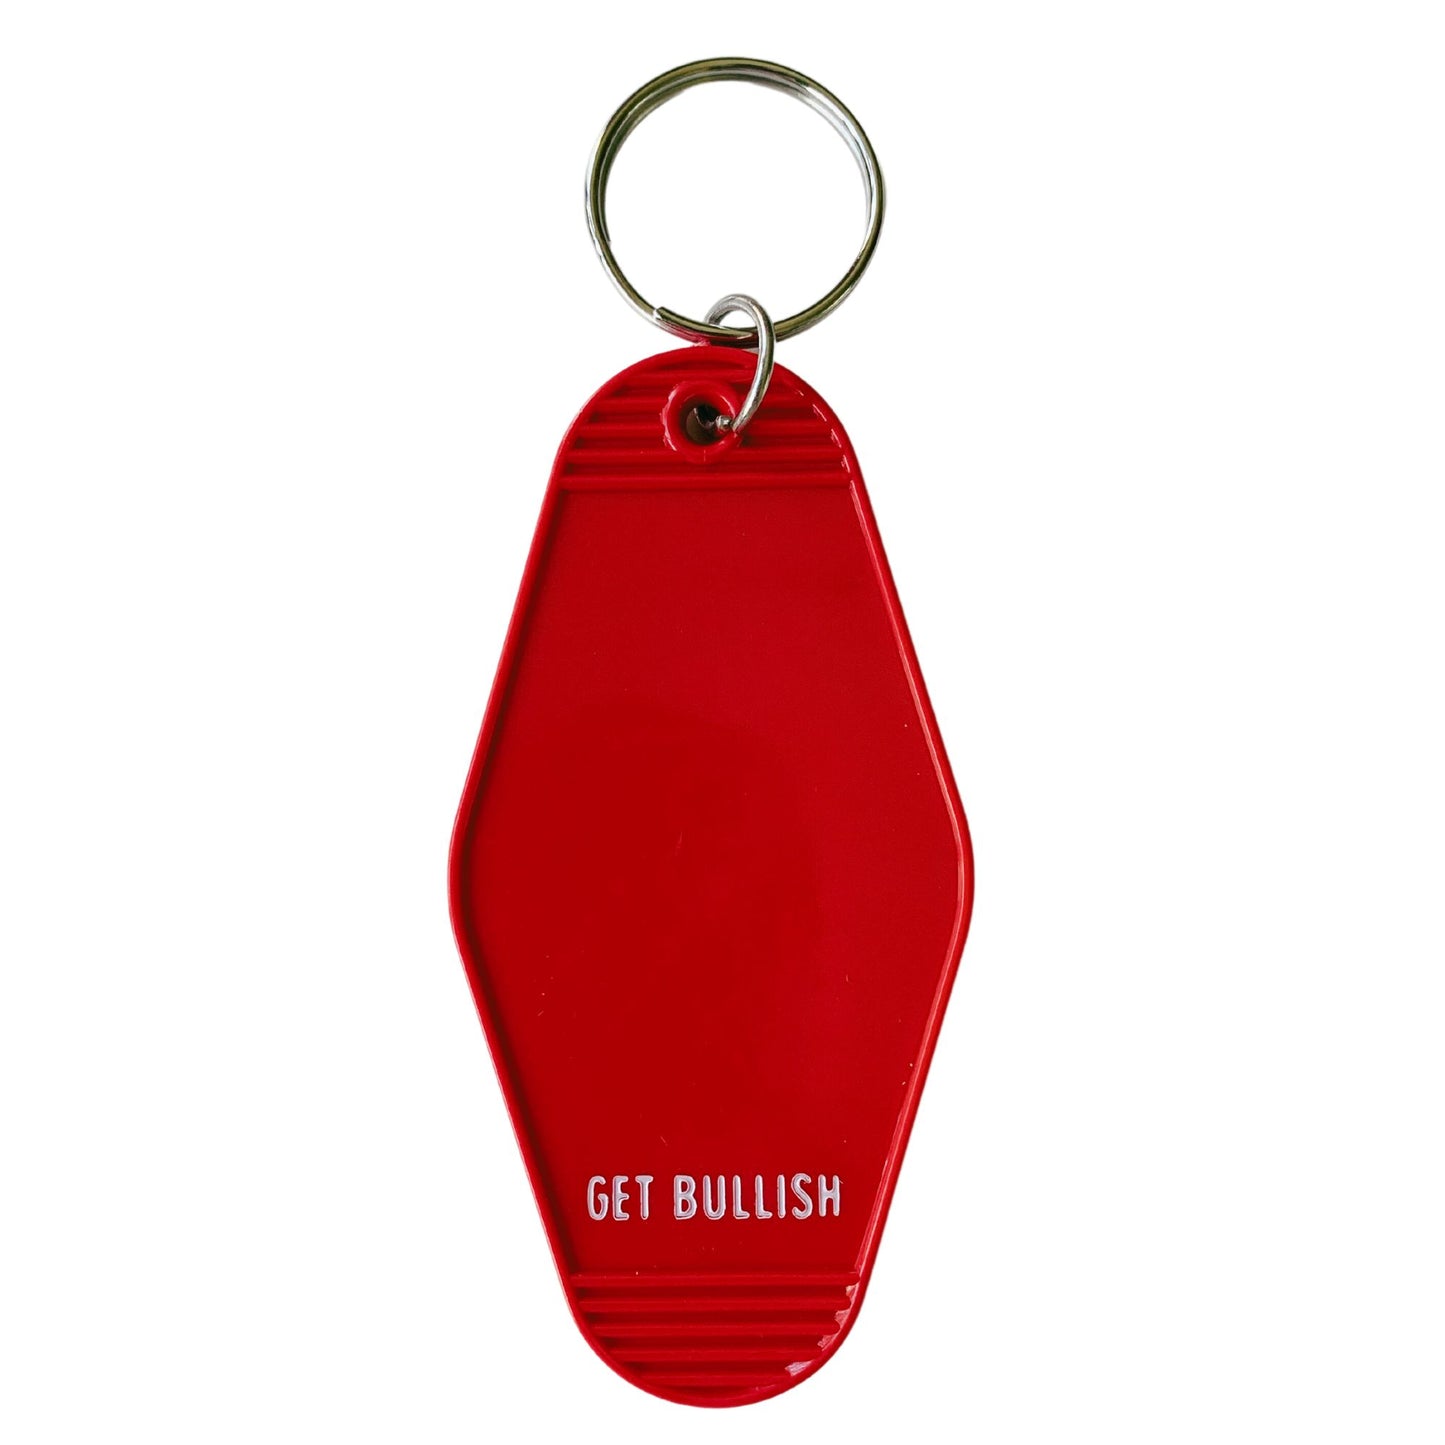 Janegay For Janeway Motel Style Keychain in Red